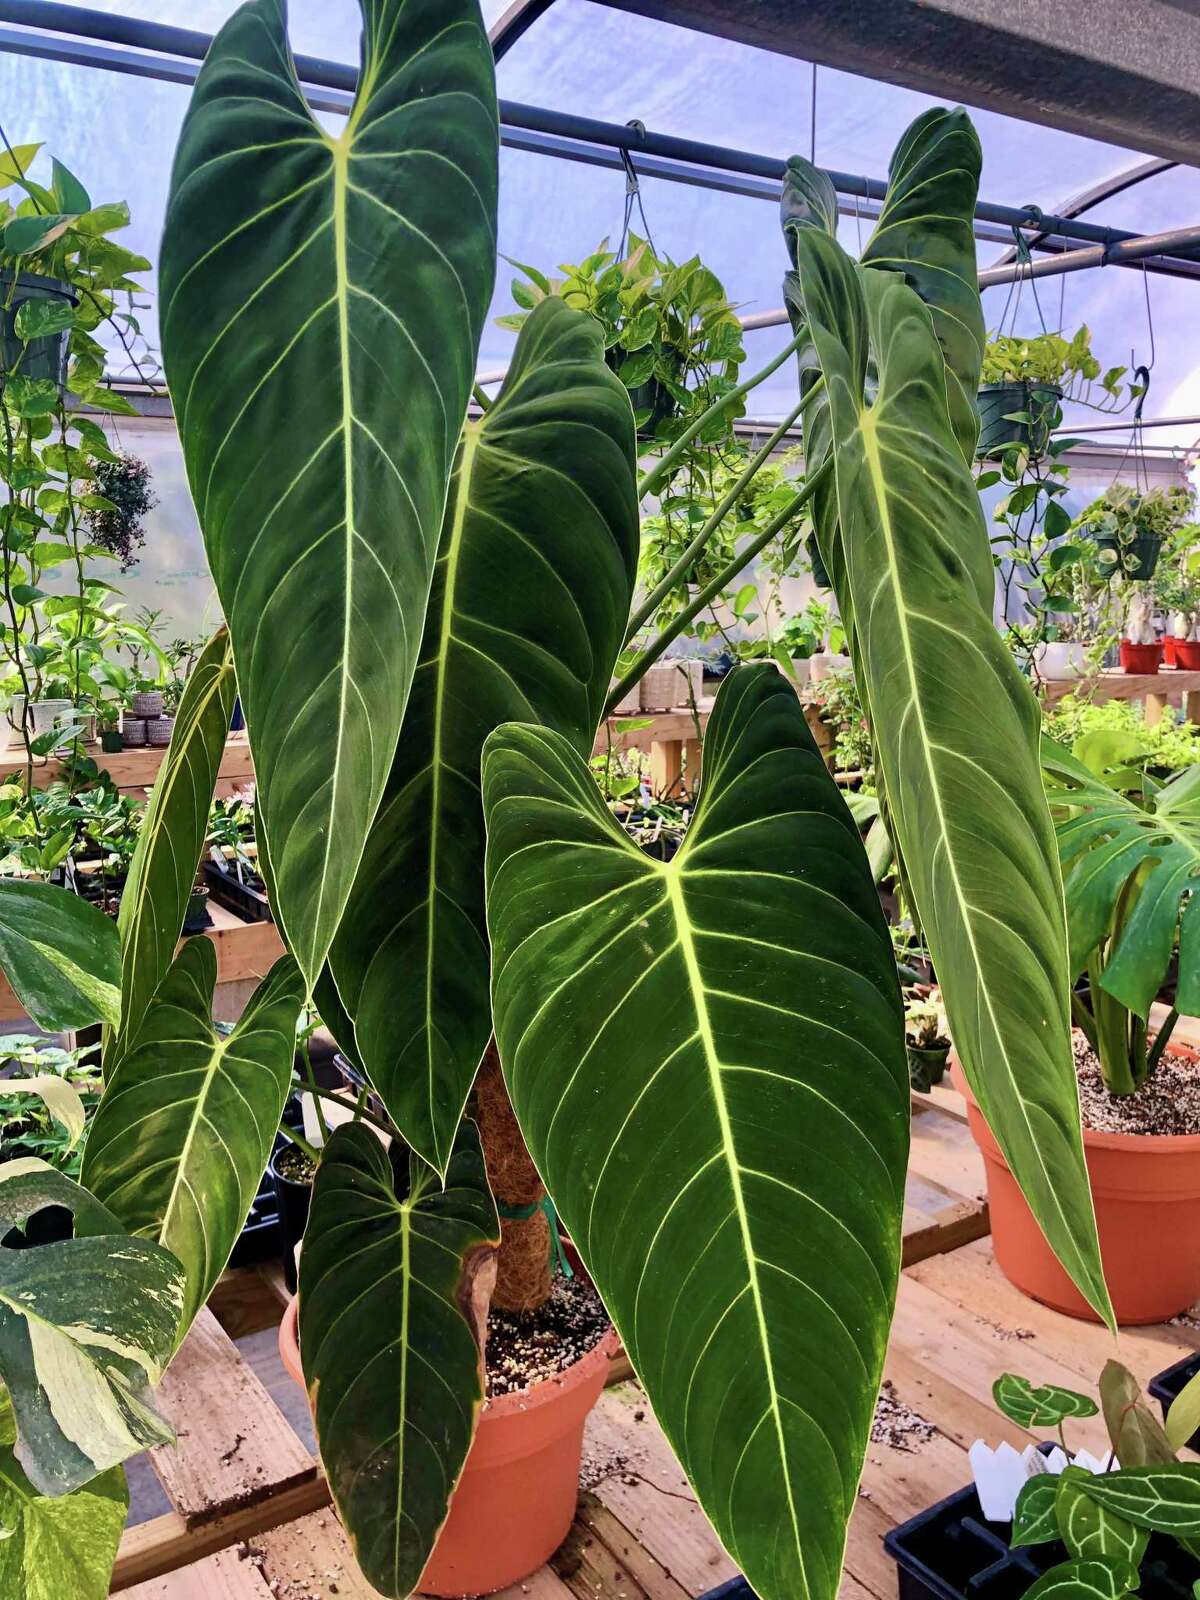 Philodendron melanochrysum at the Wild Roots Nursery.  It is known for its deep green pointed leaves speckled with gold.